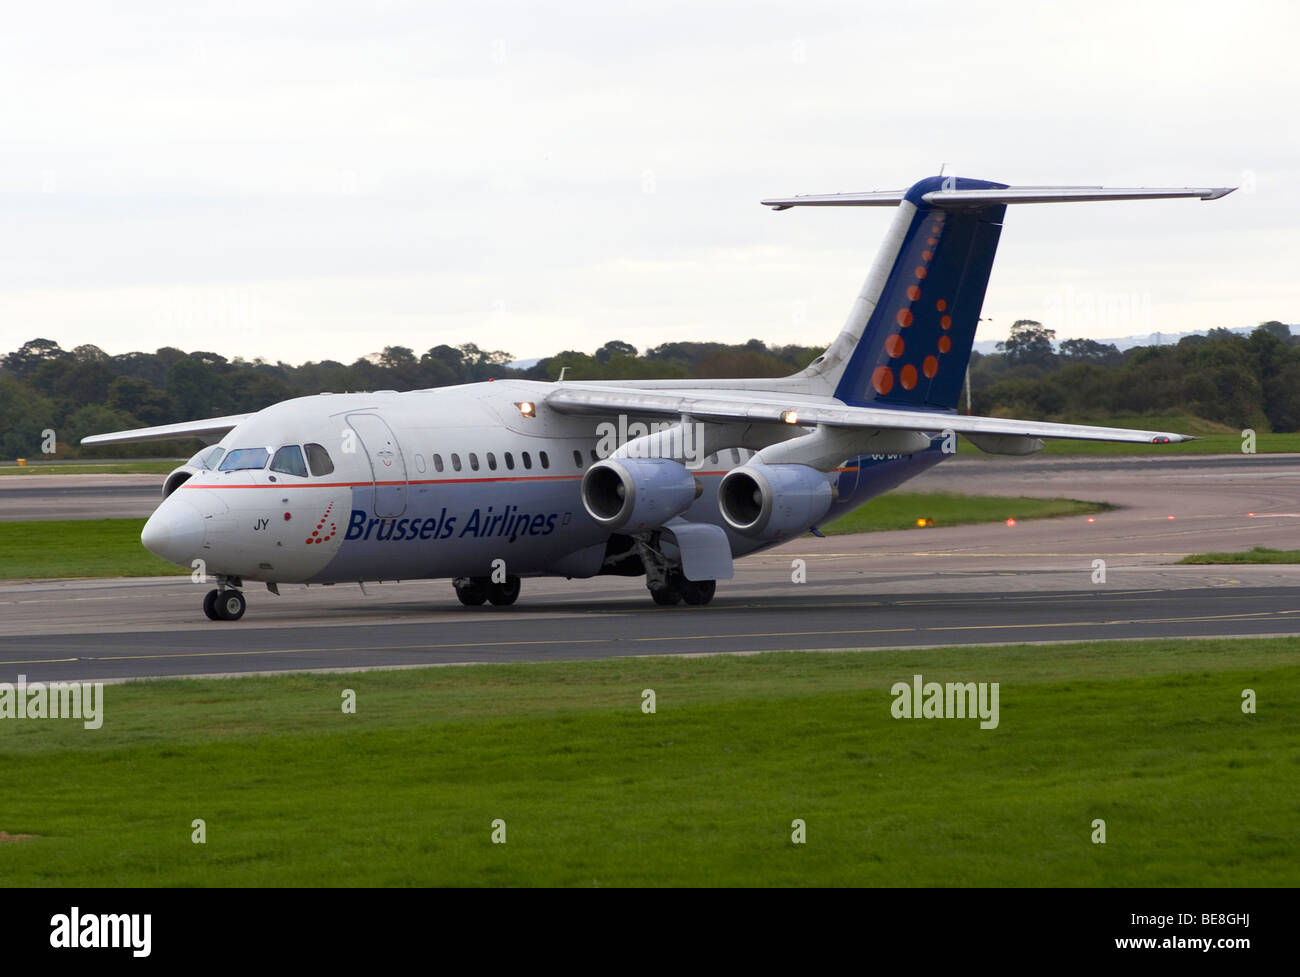 Brussels Airlines Avro RJ85 BAe 146 Jet Airliner Taxiing at Manchester Ringway Airport After Landing England United Kingdom Stock Photo